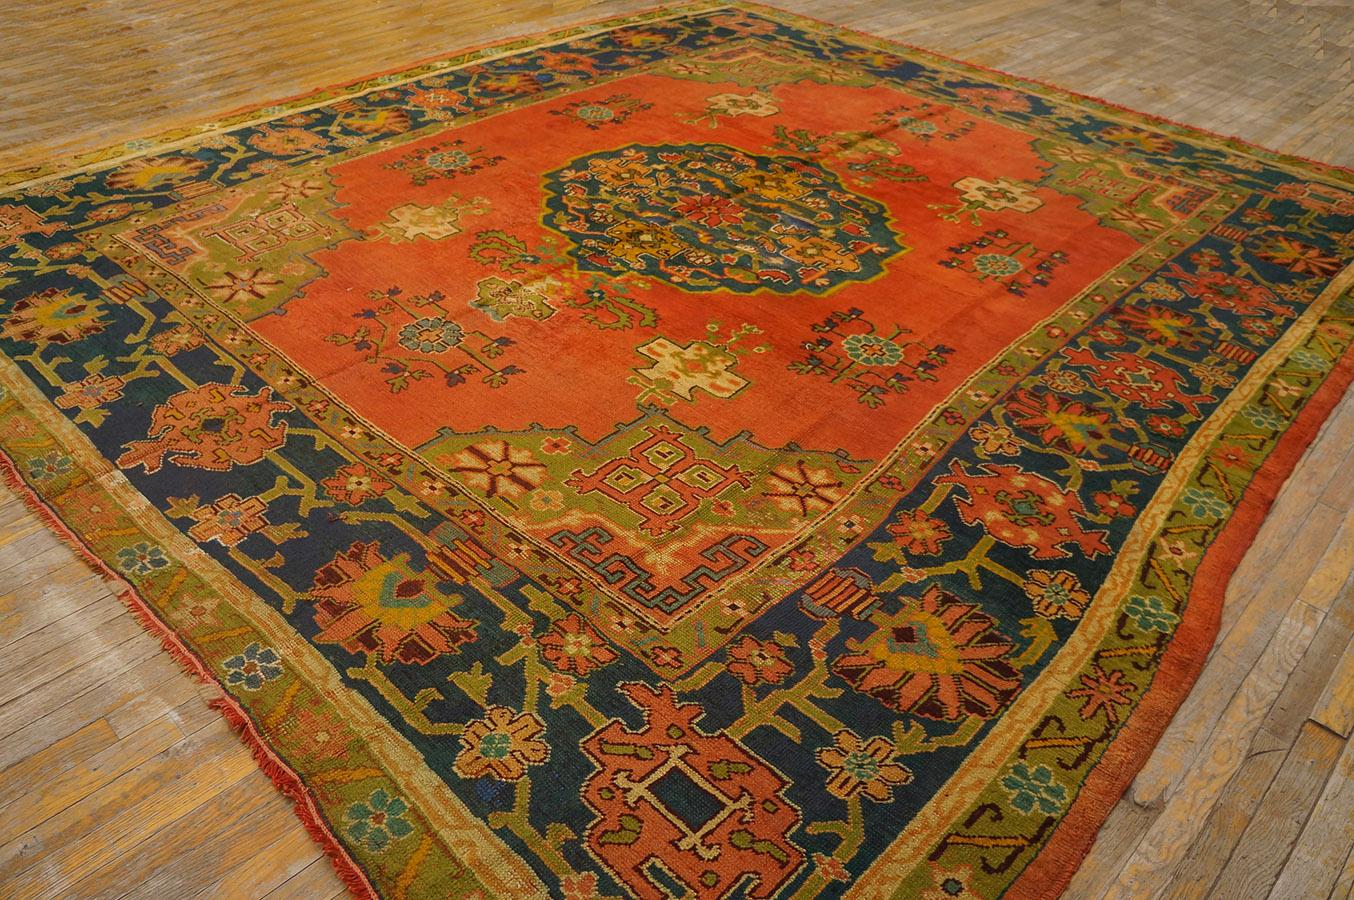 Hand-Knotted Late 19th Century Turkish Oushak Carpet ( 10' 7'' x 12' 2'' - 322 x 370 ) For Sale